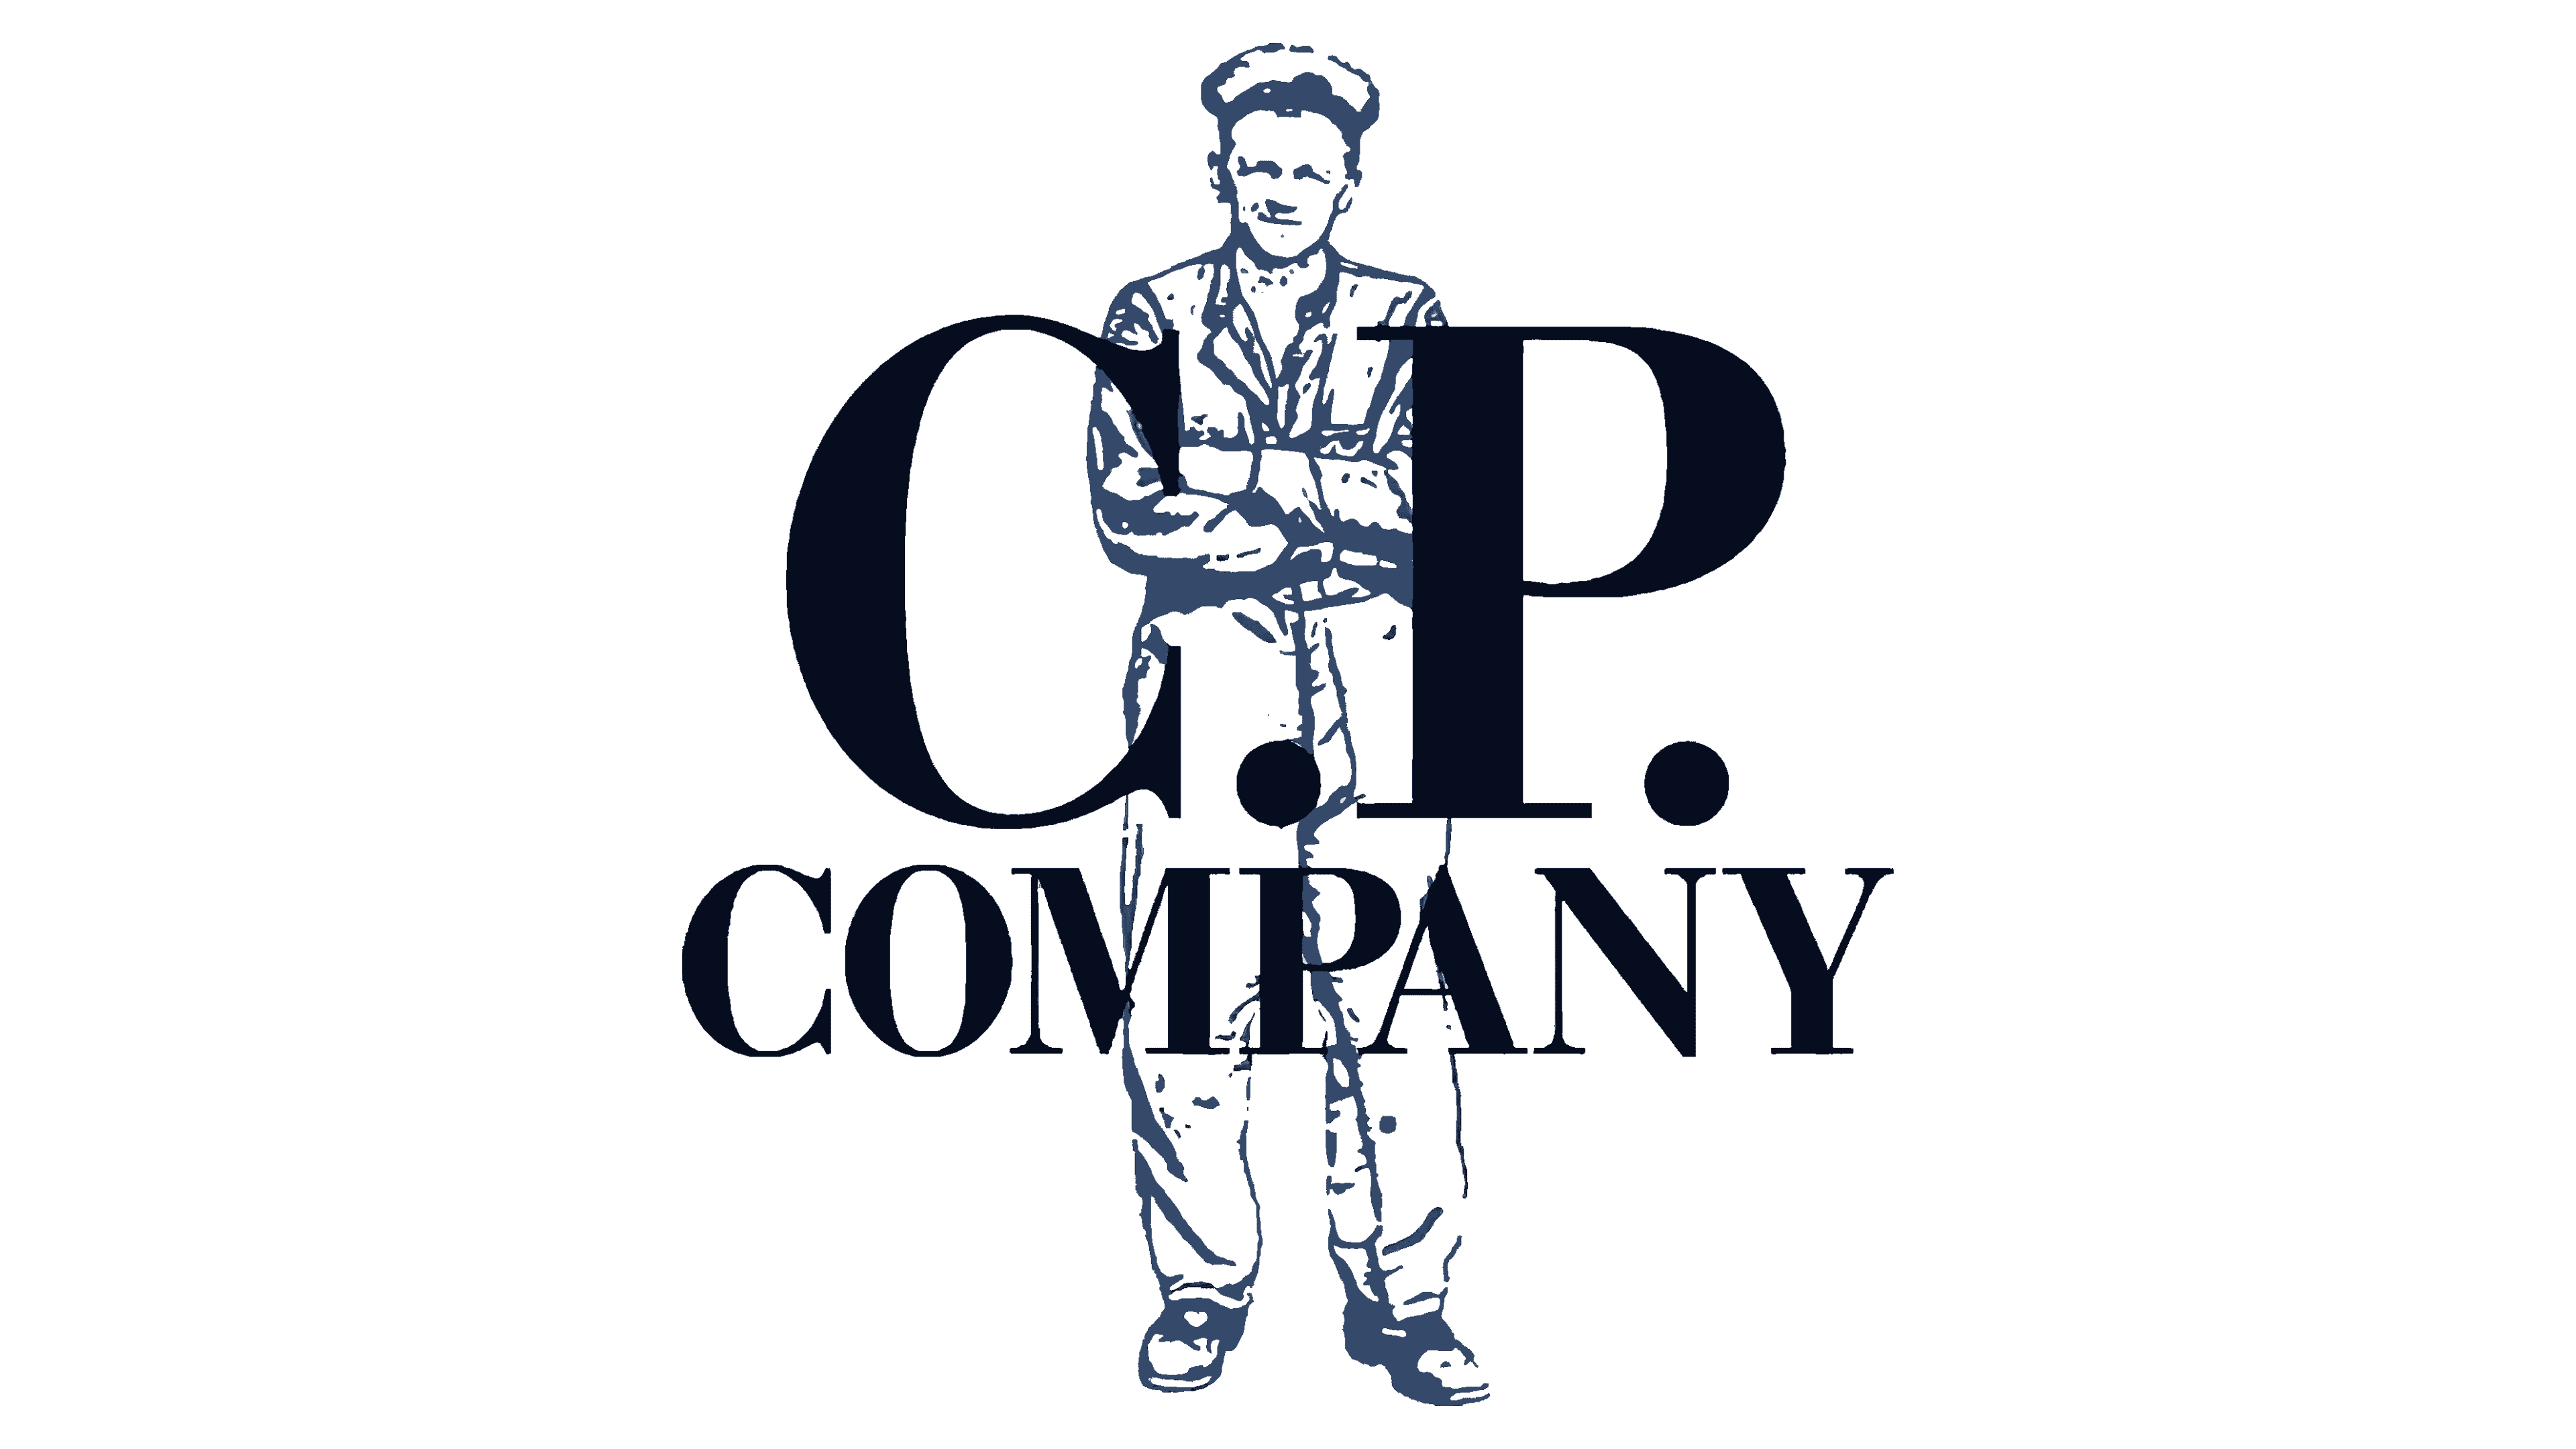 Download Southern Company Logo in SVG Vector or PNG File Format - Logo.wine